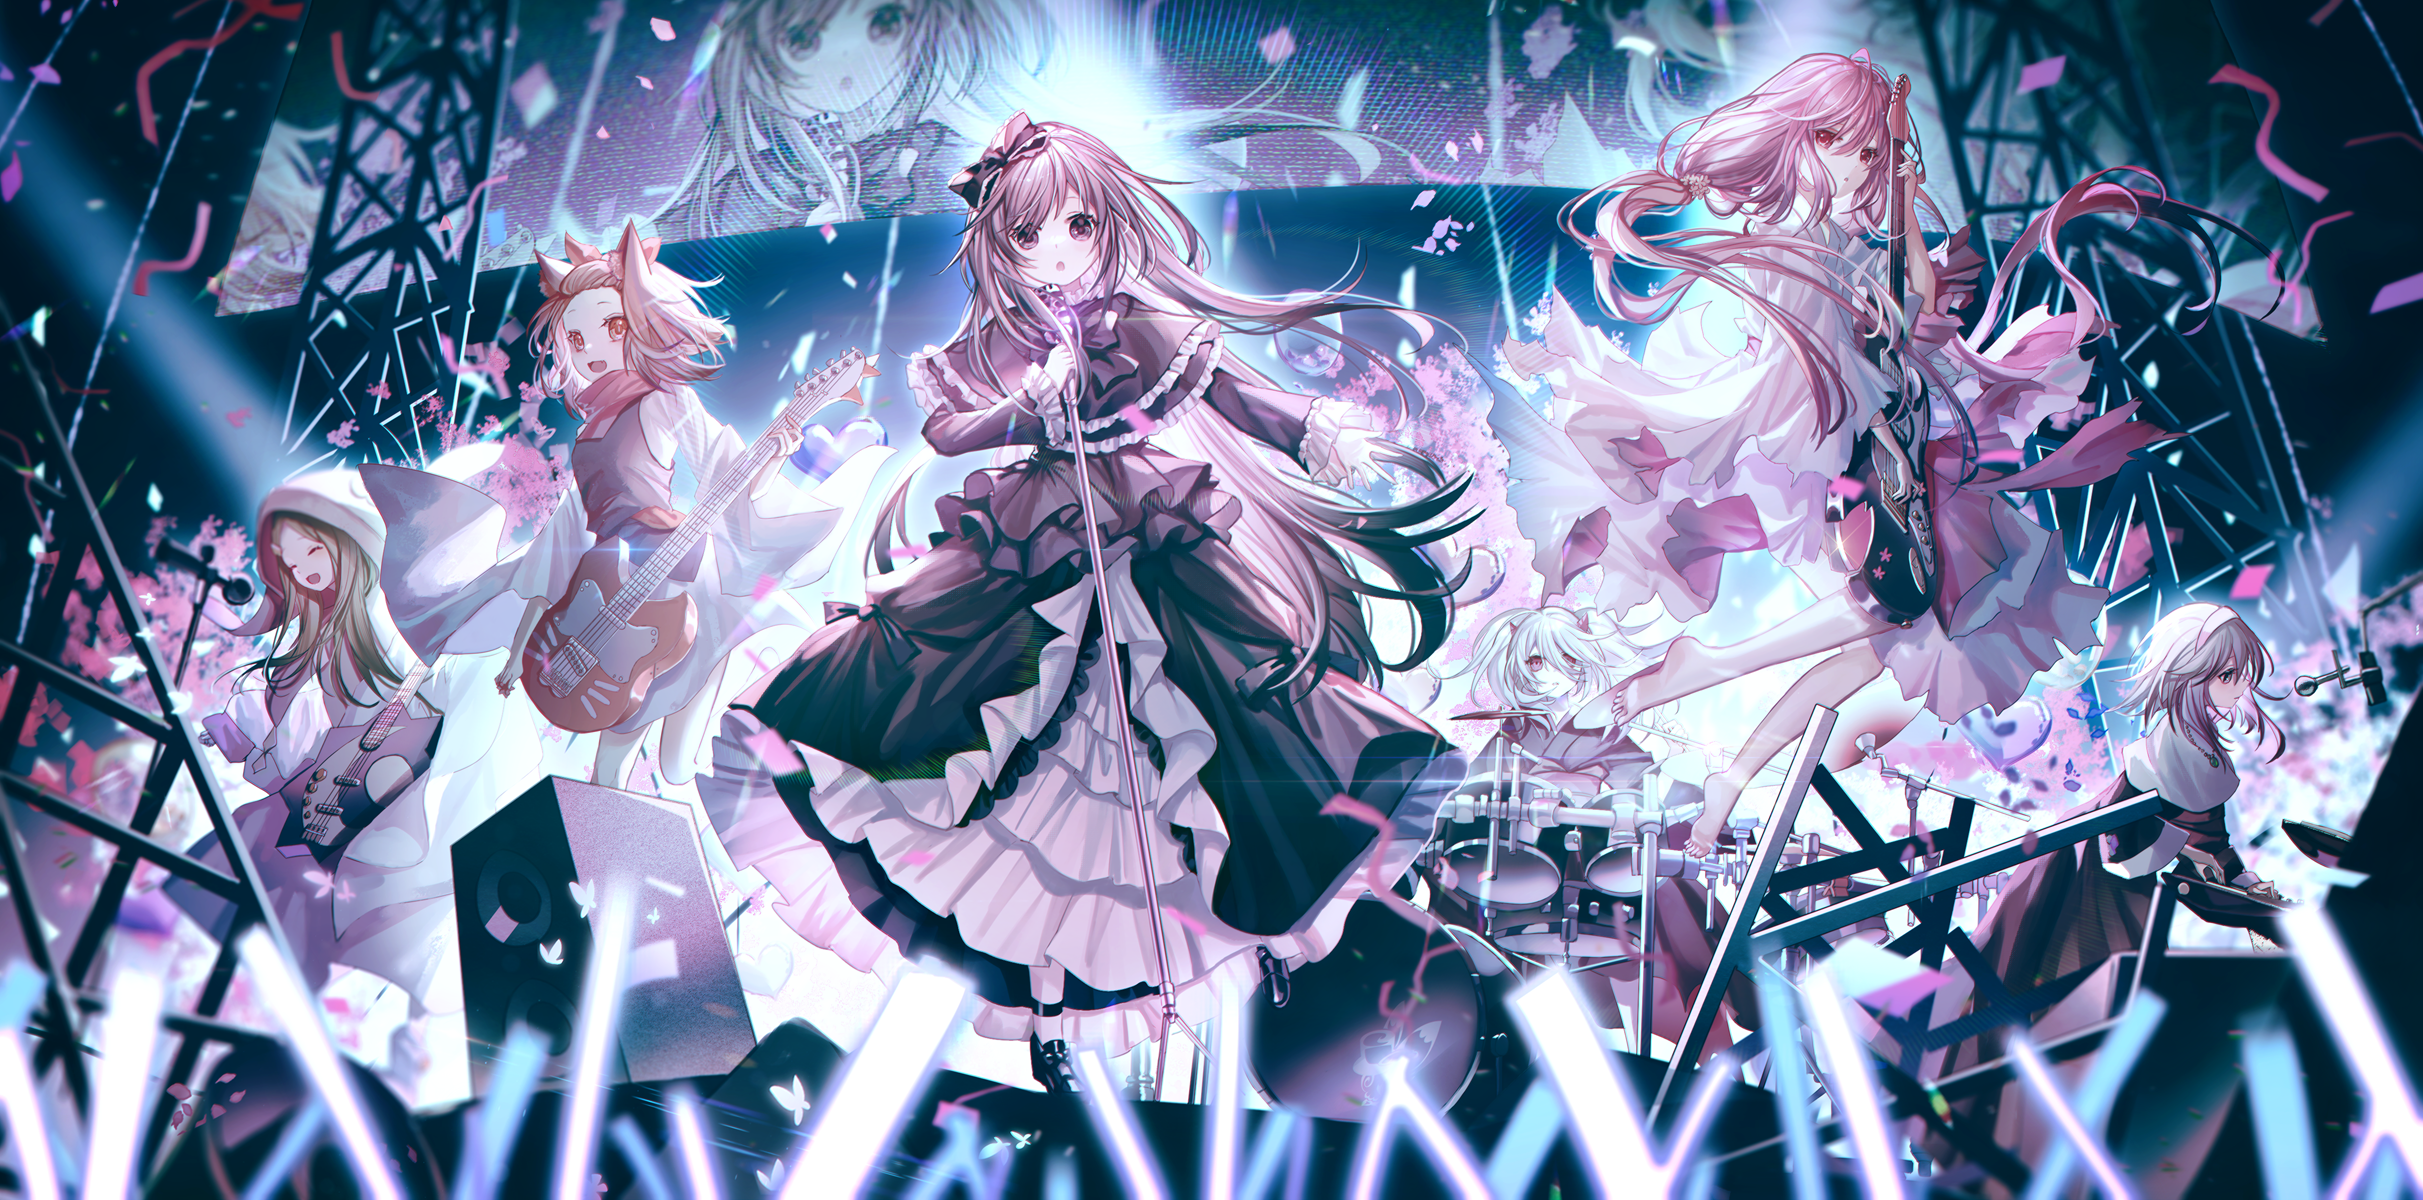 Anime Anime Girls Standing Dress Yu Gi Oh Microphone Musical Instrument Stages Stage Light Confetti  2423x1200